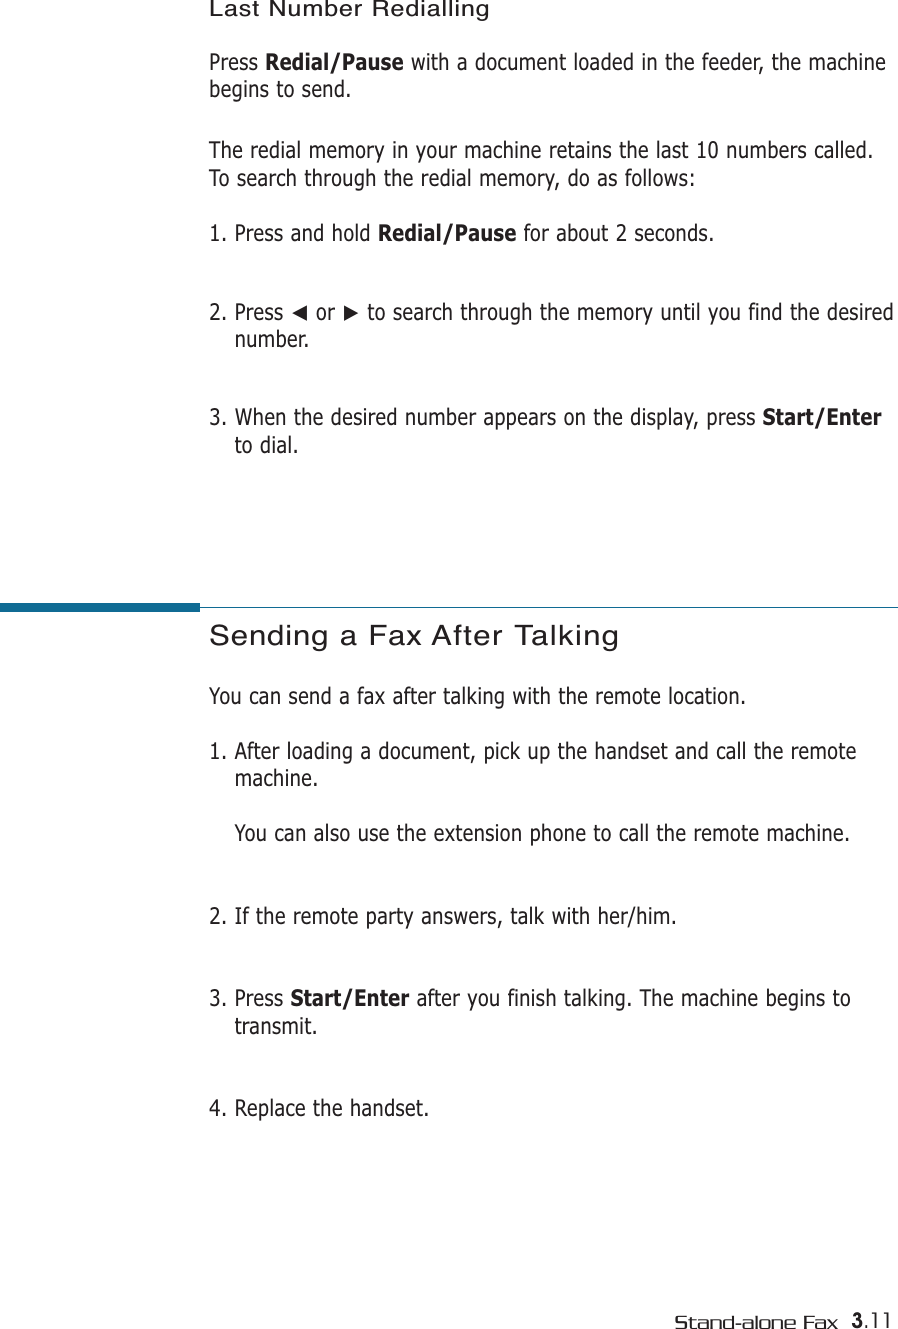 3.11Stand-alone FaxSending a Fax After Talking You can send a fax after talking with the remote location.1. After loading a document, pick up the handset and call the remotemachine. You can also use the extension phone to call the remote machine.2. If the remote party answers, talk with her/him.3. Press Start/Enter after you finish talking. The machine begins totransmit.4. Replace the handset.Last Number RediallingPress Redial/Pause with a document loaded in the feeder, the machinebegins to send.The redial memory in your machine retains the last 10 numbers called.To search through the redial memory, do as follows:1. Press and hold Redial/Pause for about 2 seconds. 2. Press ➛or ❿to search through the memory until you find the desirednumber.3. When the desired number appears on the display, press Start/Enterto dial. 